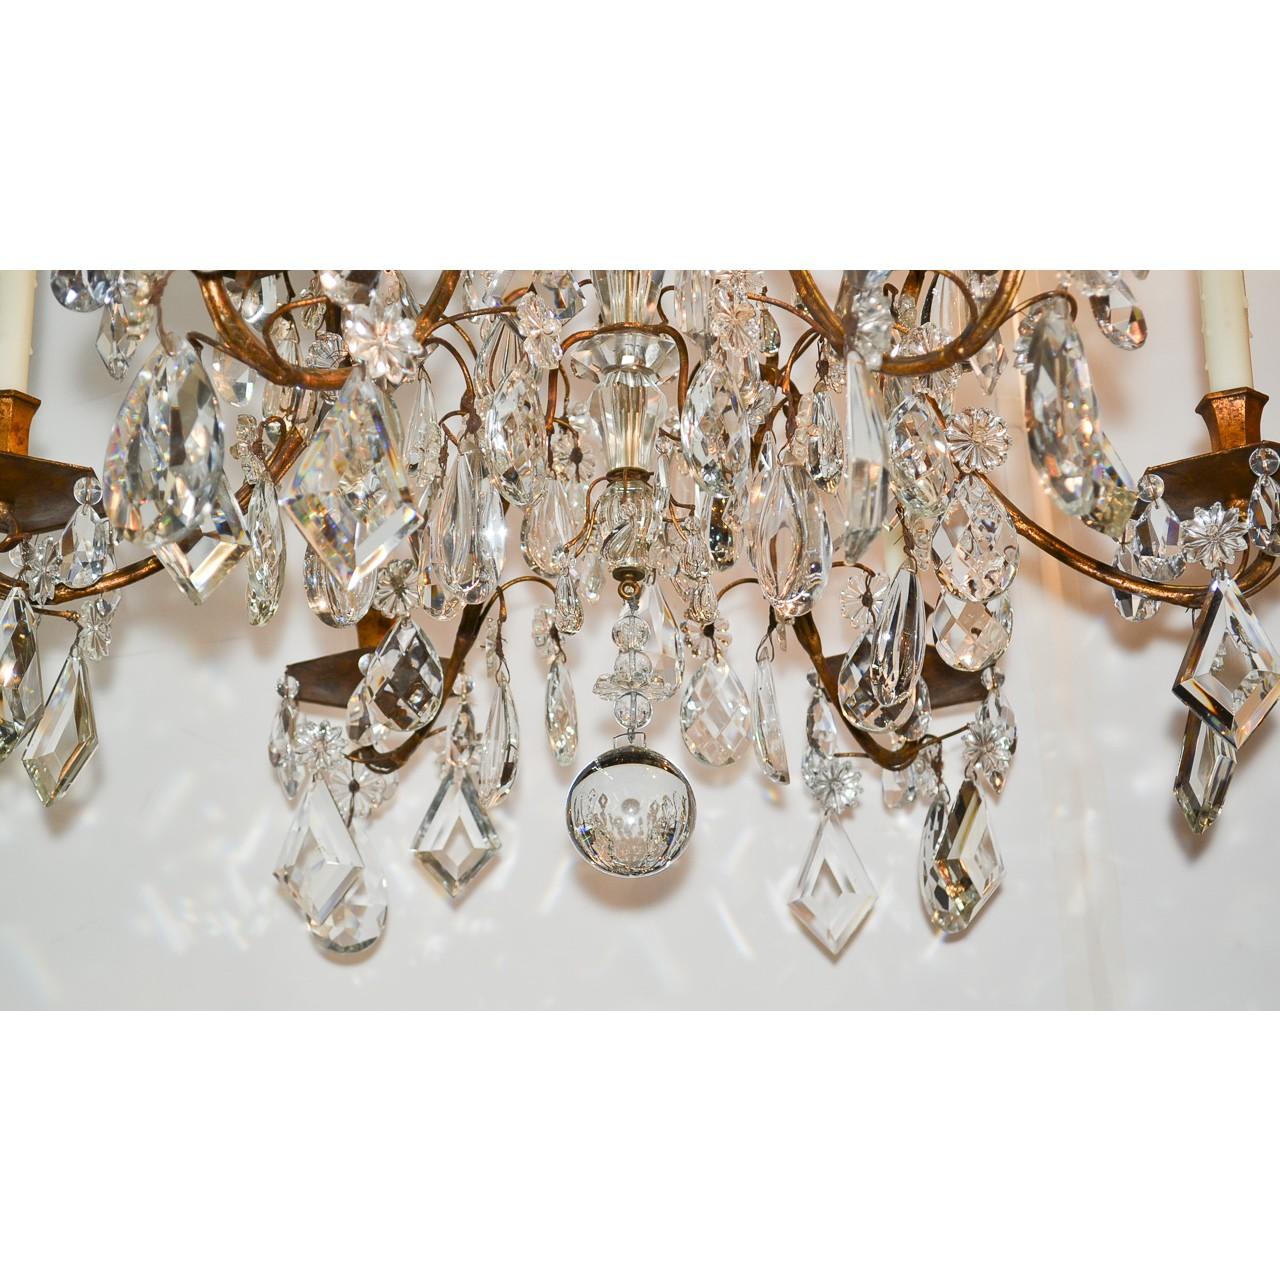 Stunning high style French gilt bronze and crystal chandelier. Lavishly decorated with multiple graduated tiers of fancy crystals, including almond, tear-drop, kite, and diamond prisms. Accented with an abundance of crystal rosettes and having an